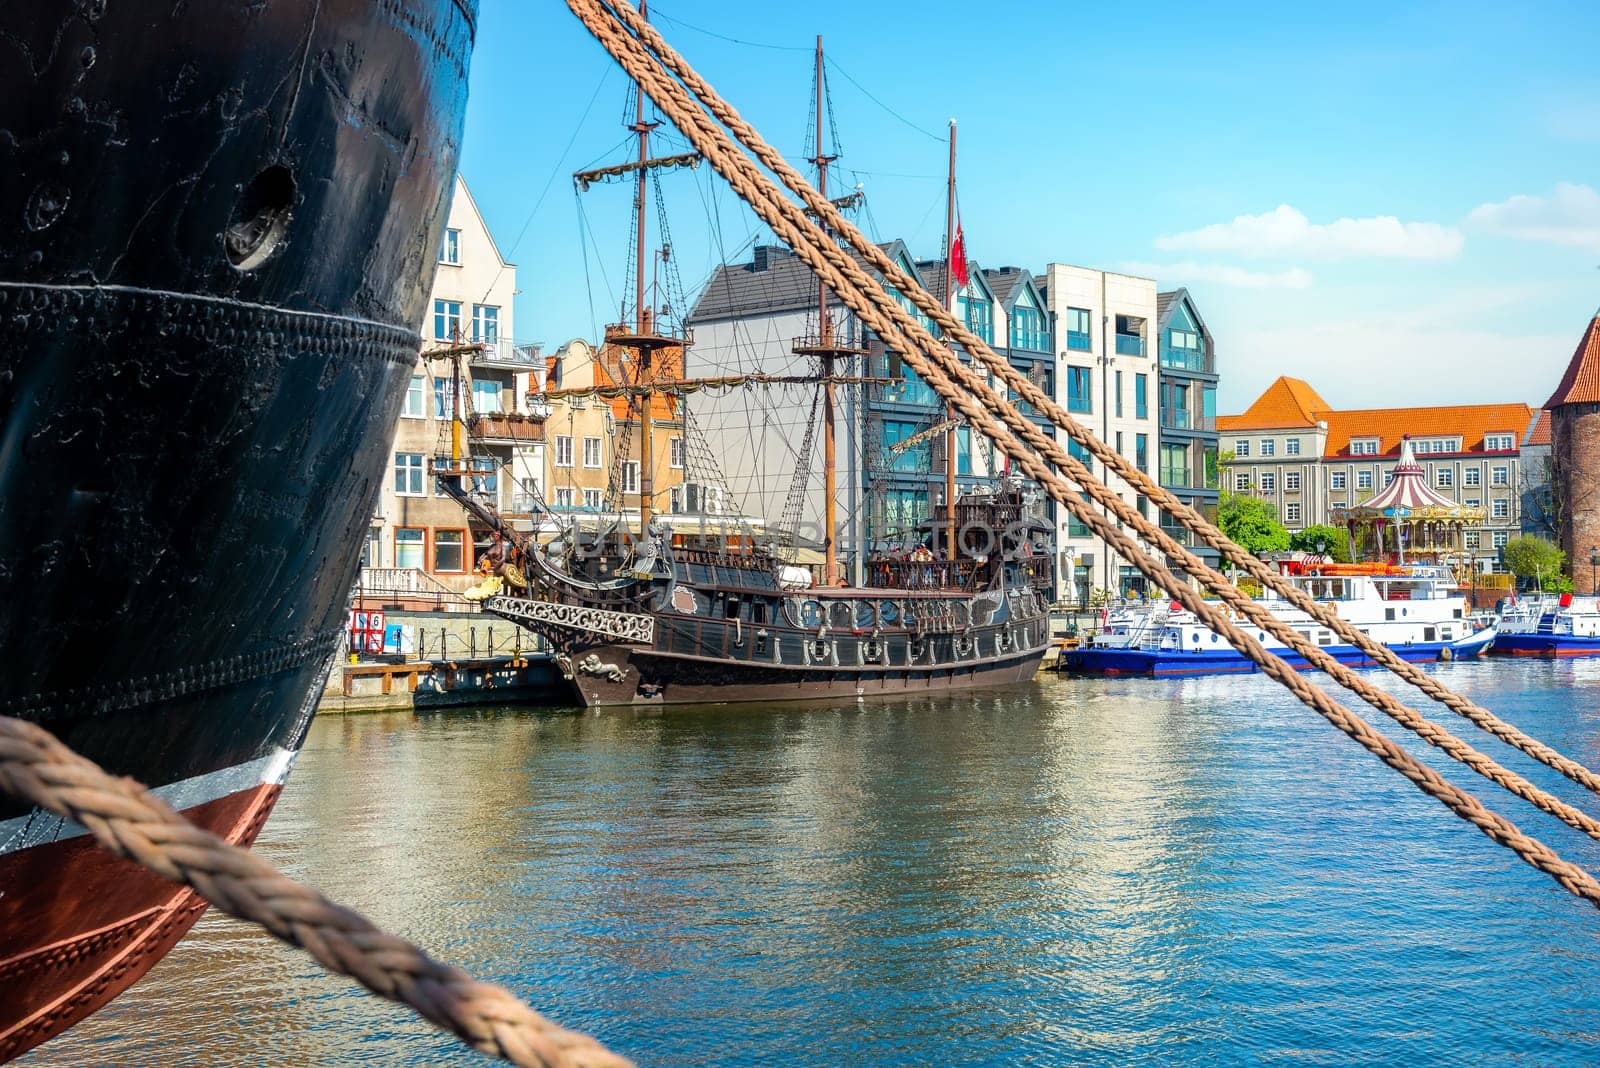 Sailing ship in the canal of the city of Gdansk